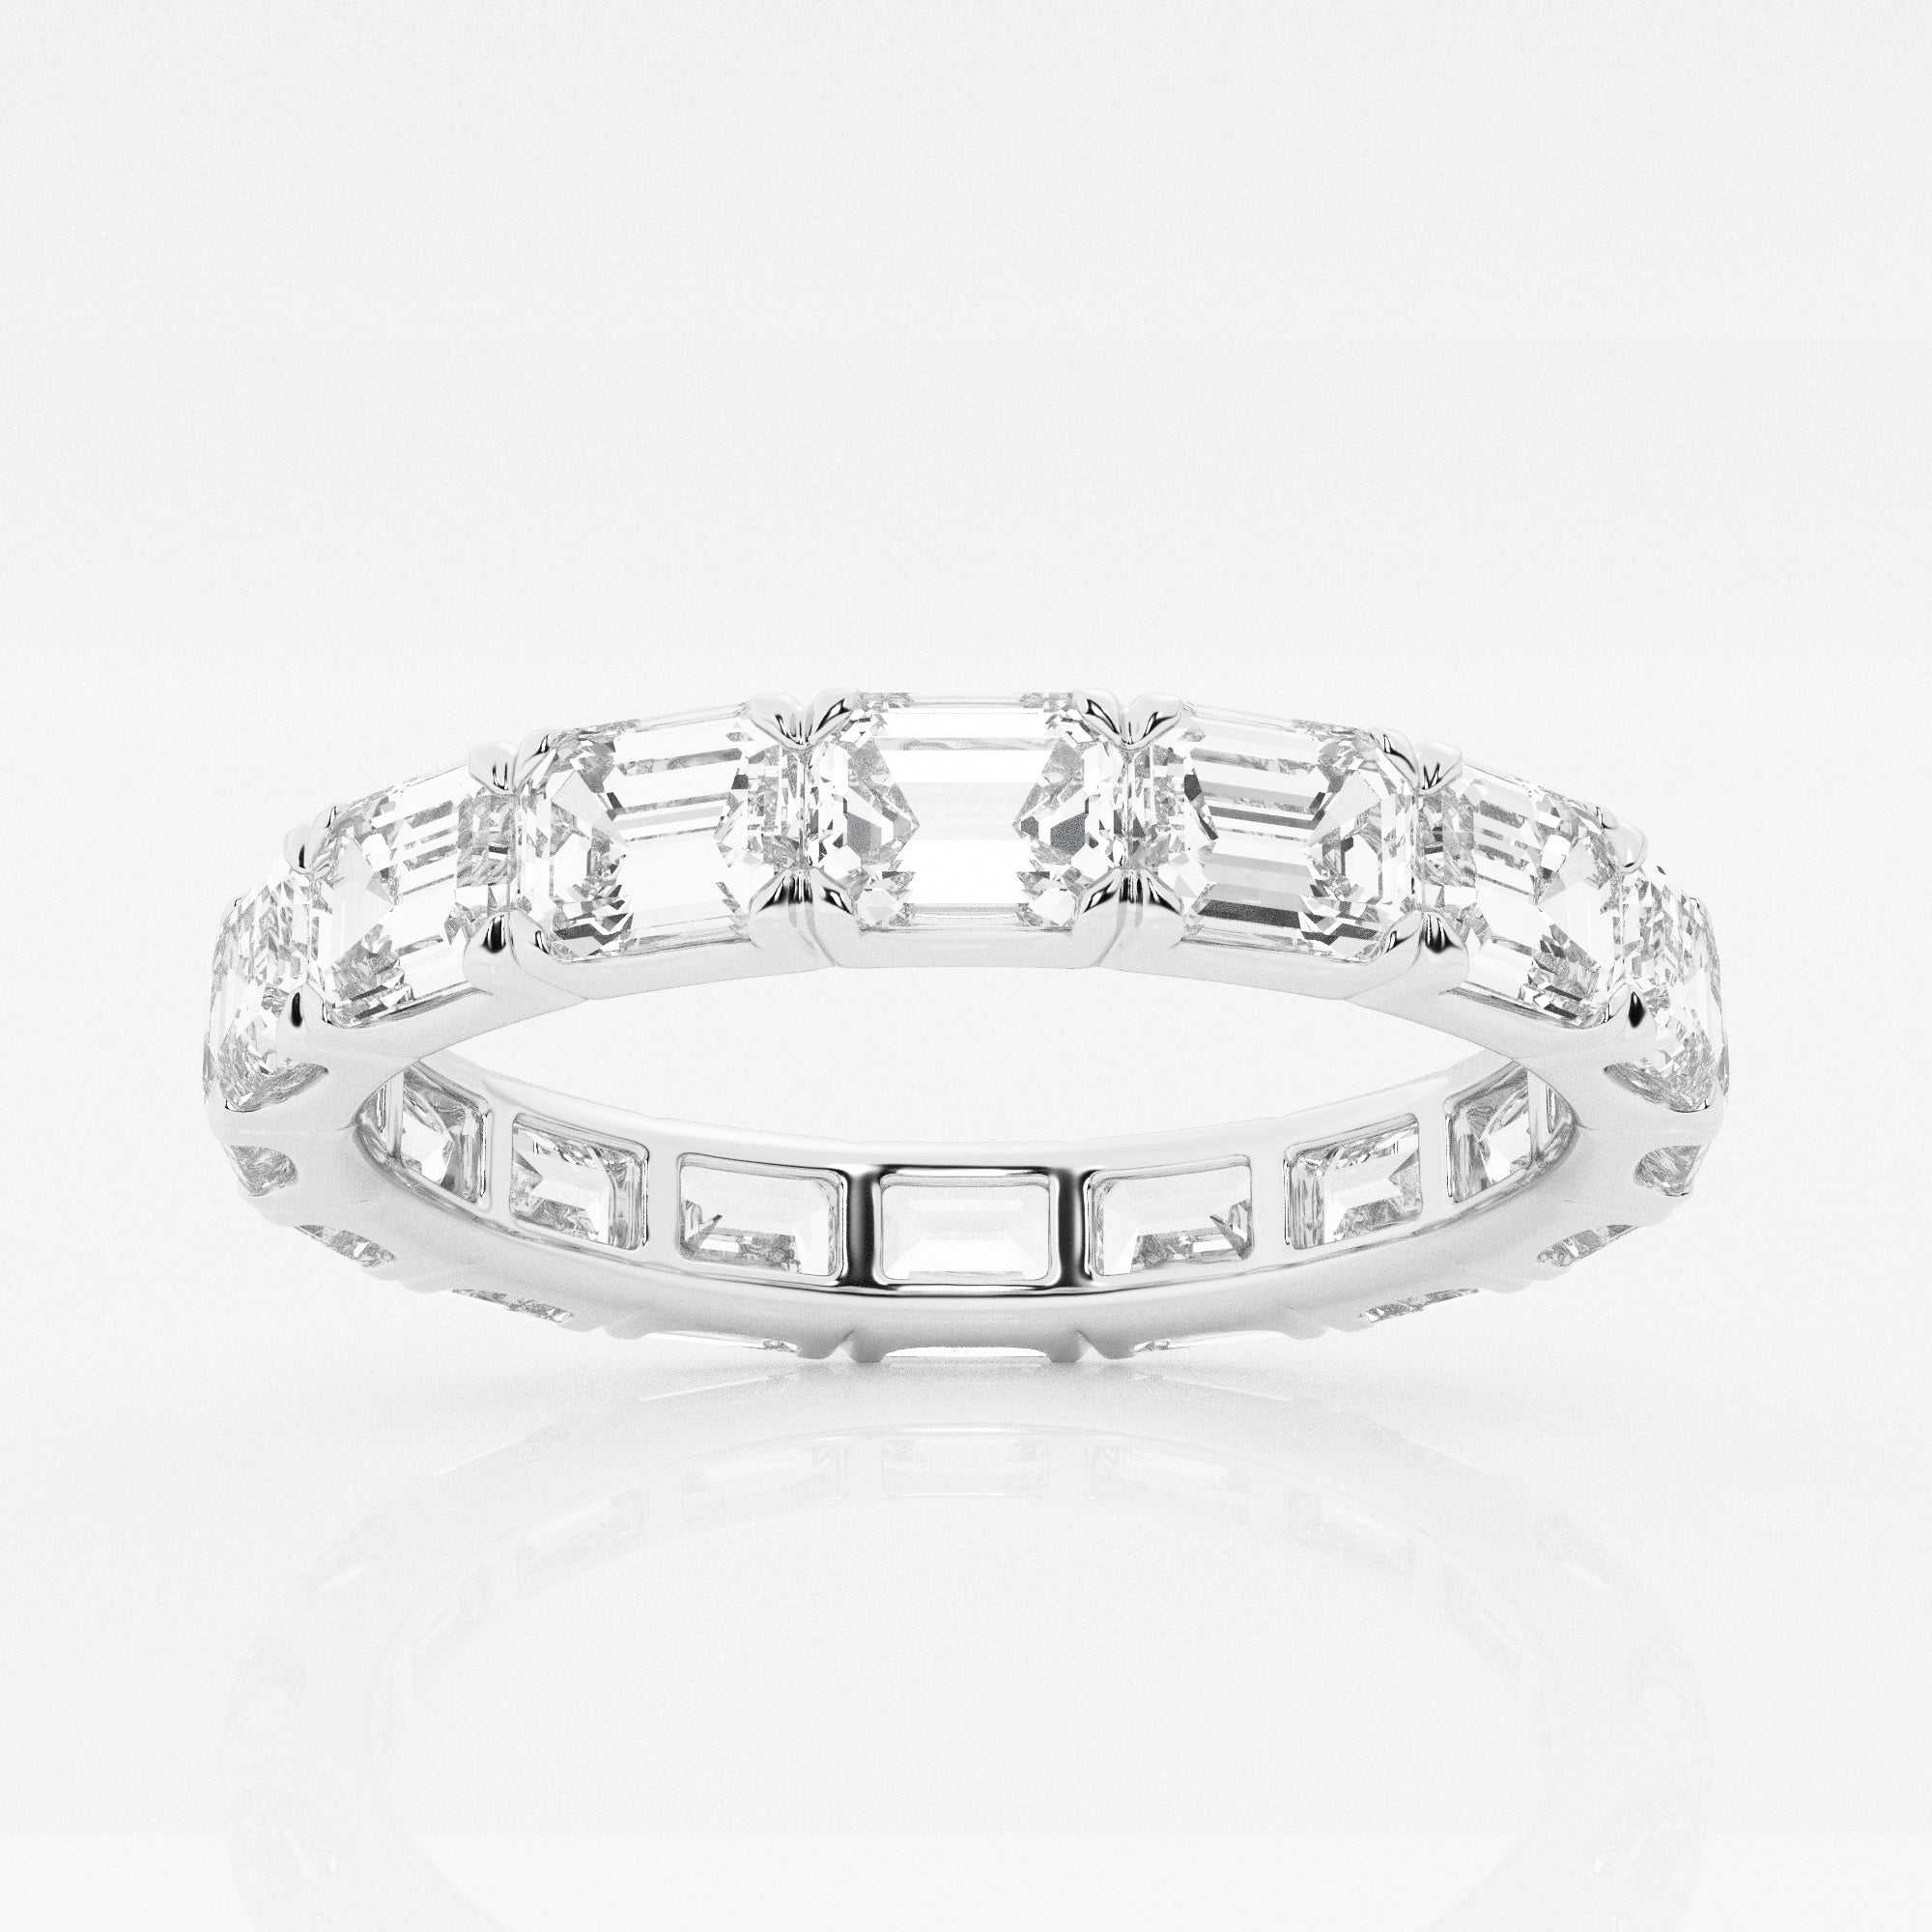 14kt white gold/4/4.25/4.5/4.75/ 5/5.25/5.5/5.75/6/6.25/6.5/6.75/7/7.25/7.5/ 7.75/8/8.25/8.5/8.75/9/top